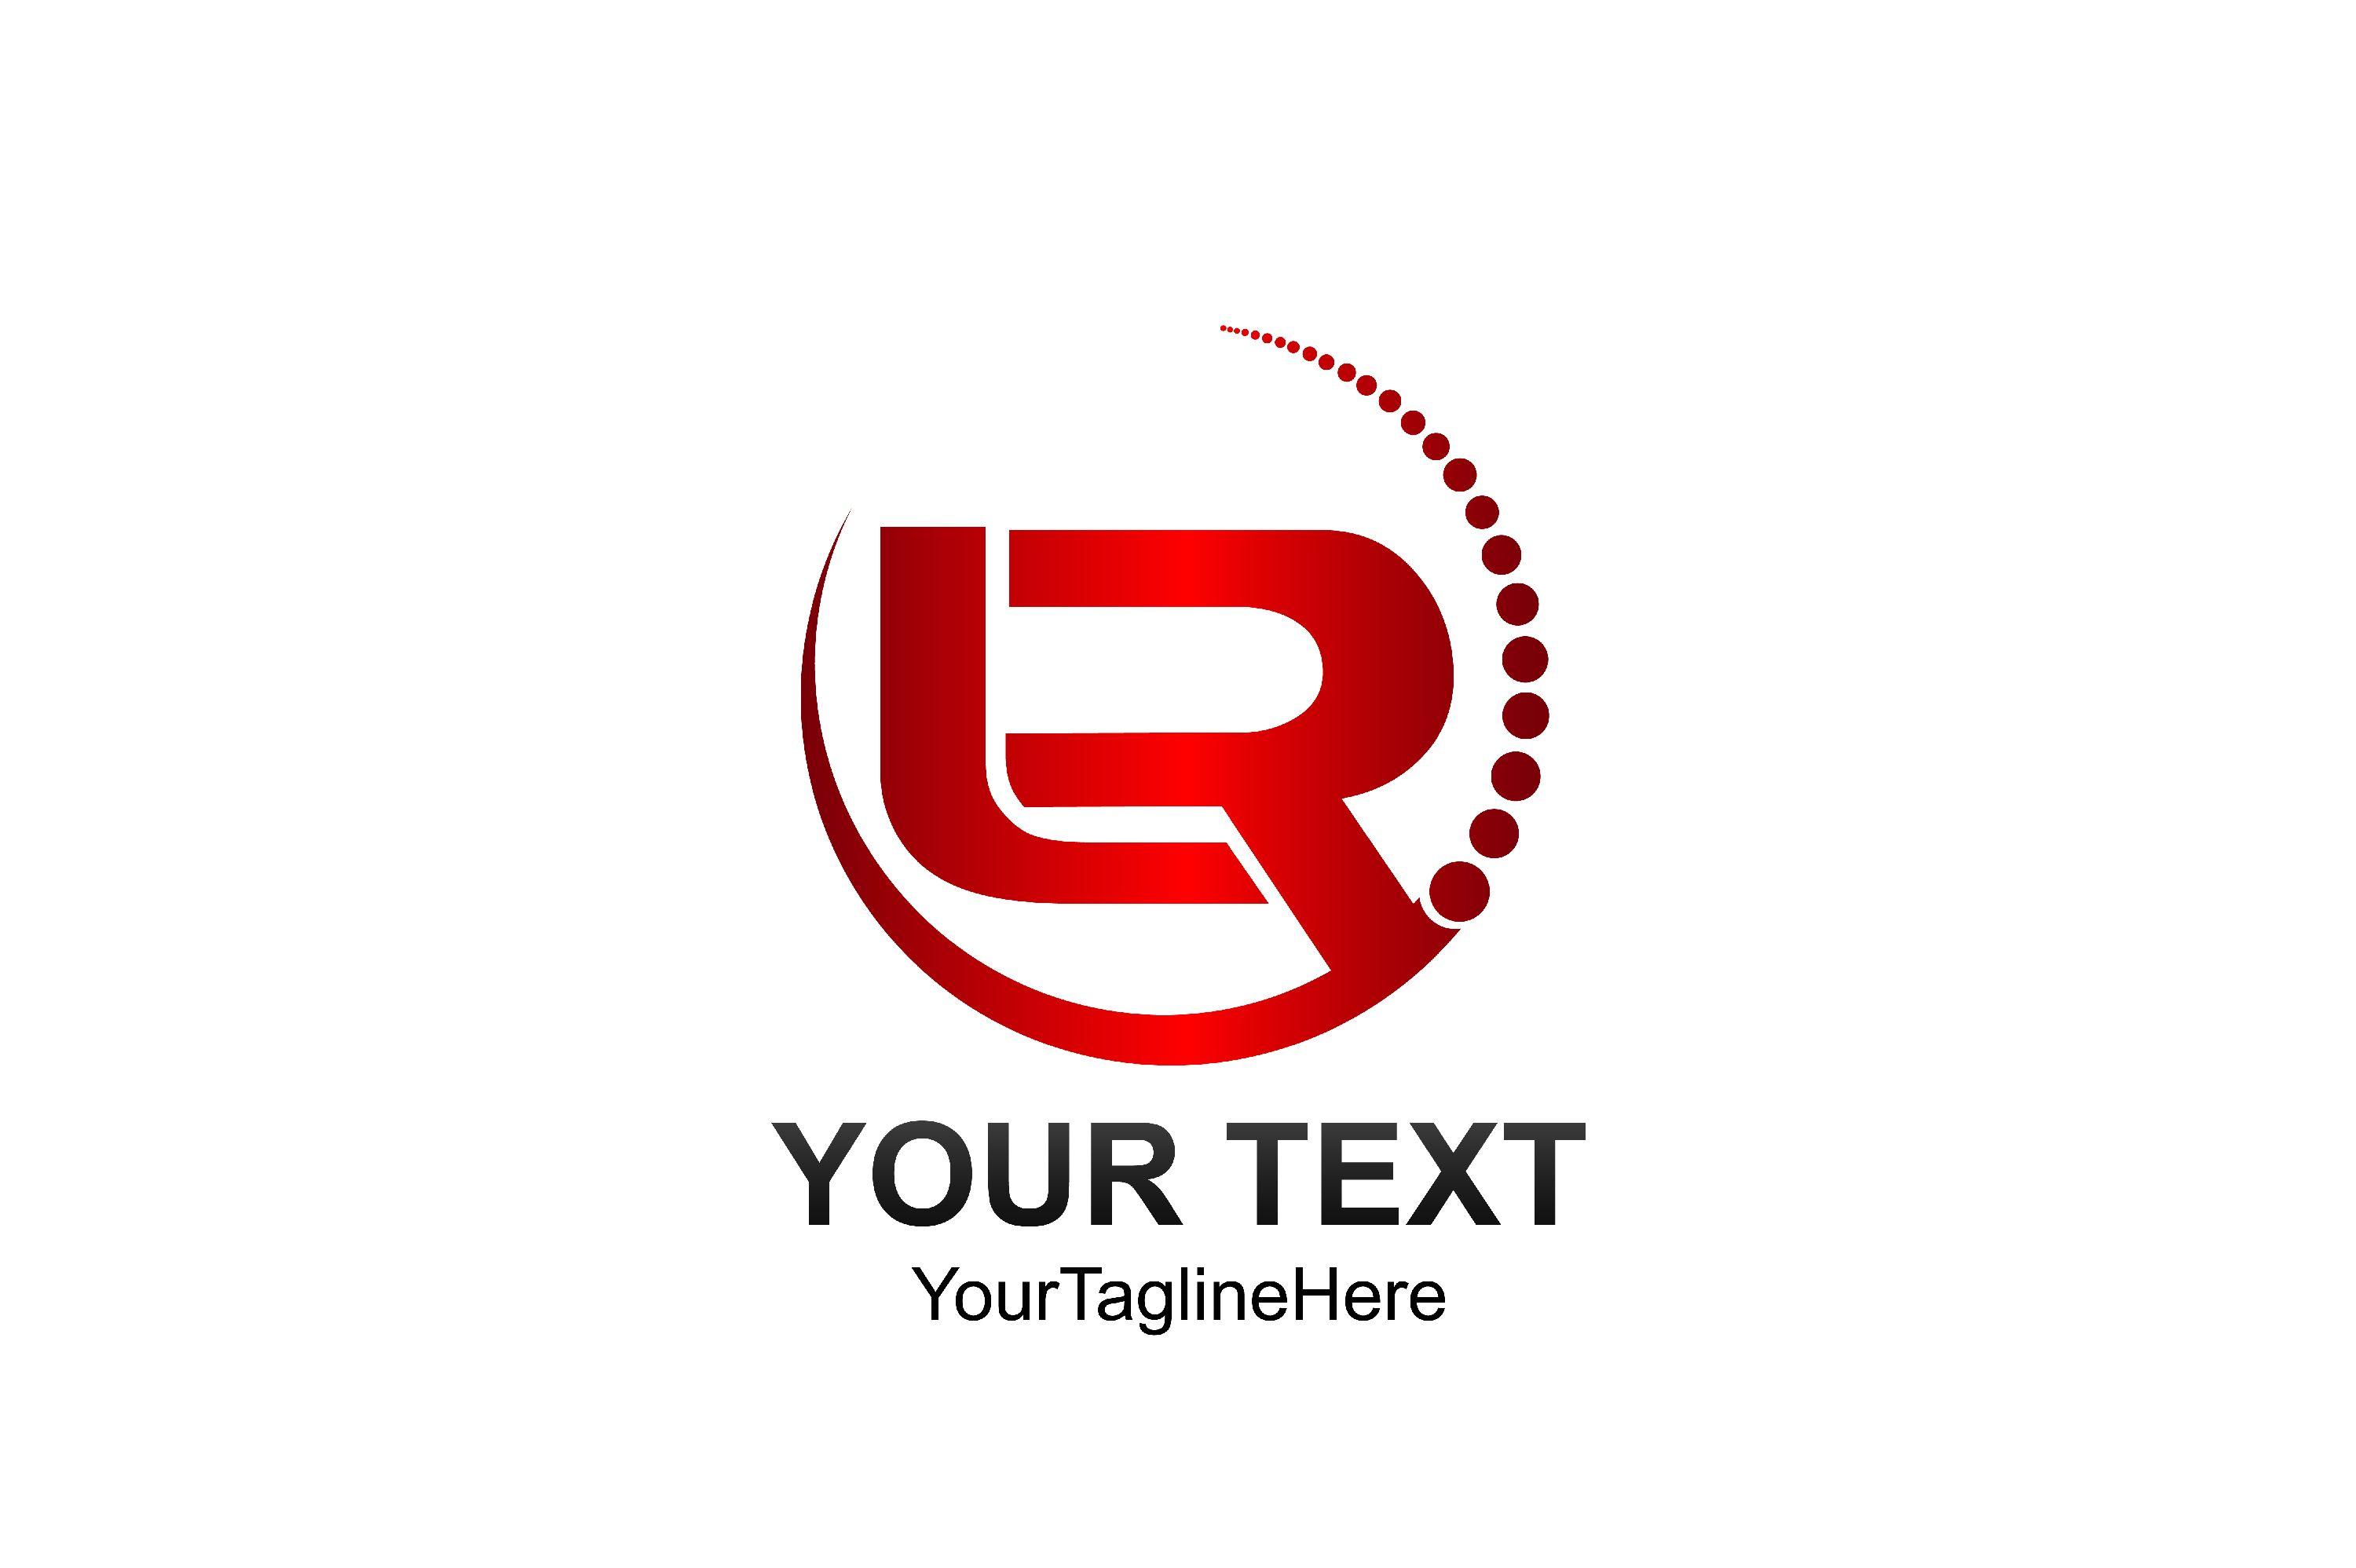 LR Logo - Initial letter LR logo template colored red circle swoosh design for  business and company identity